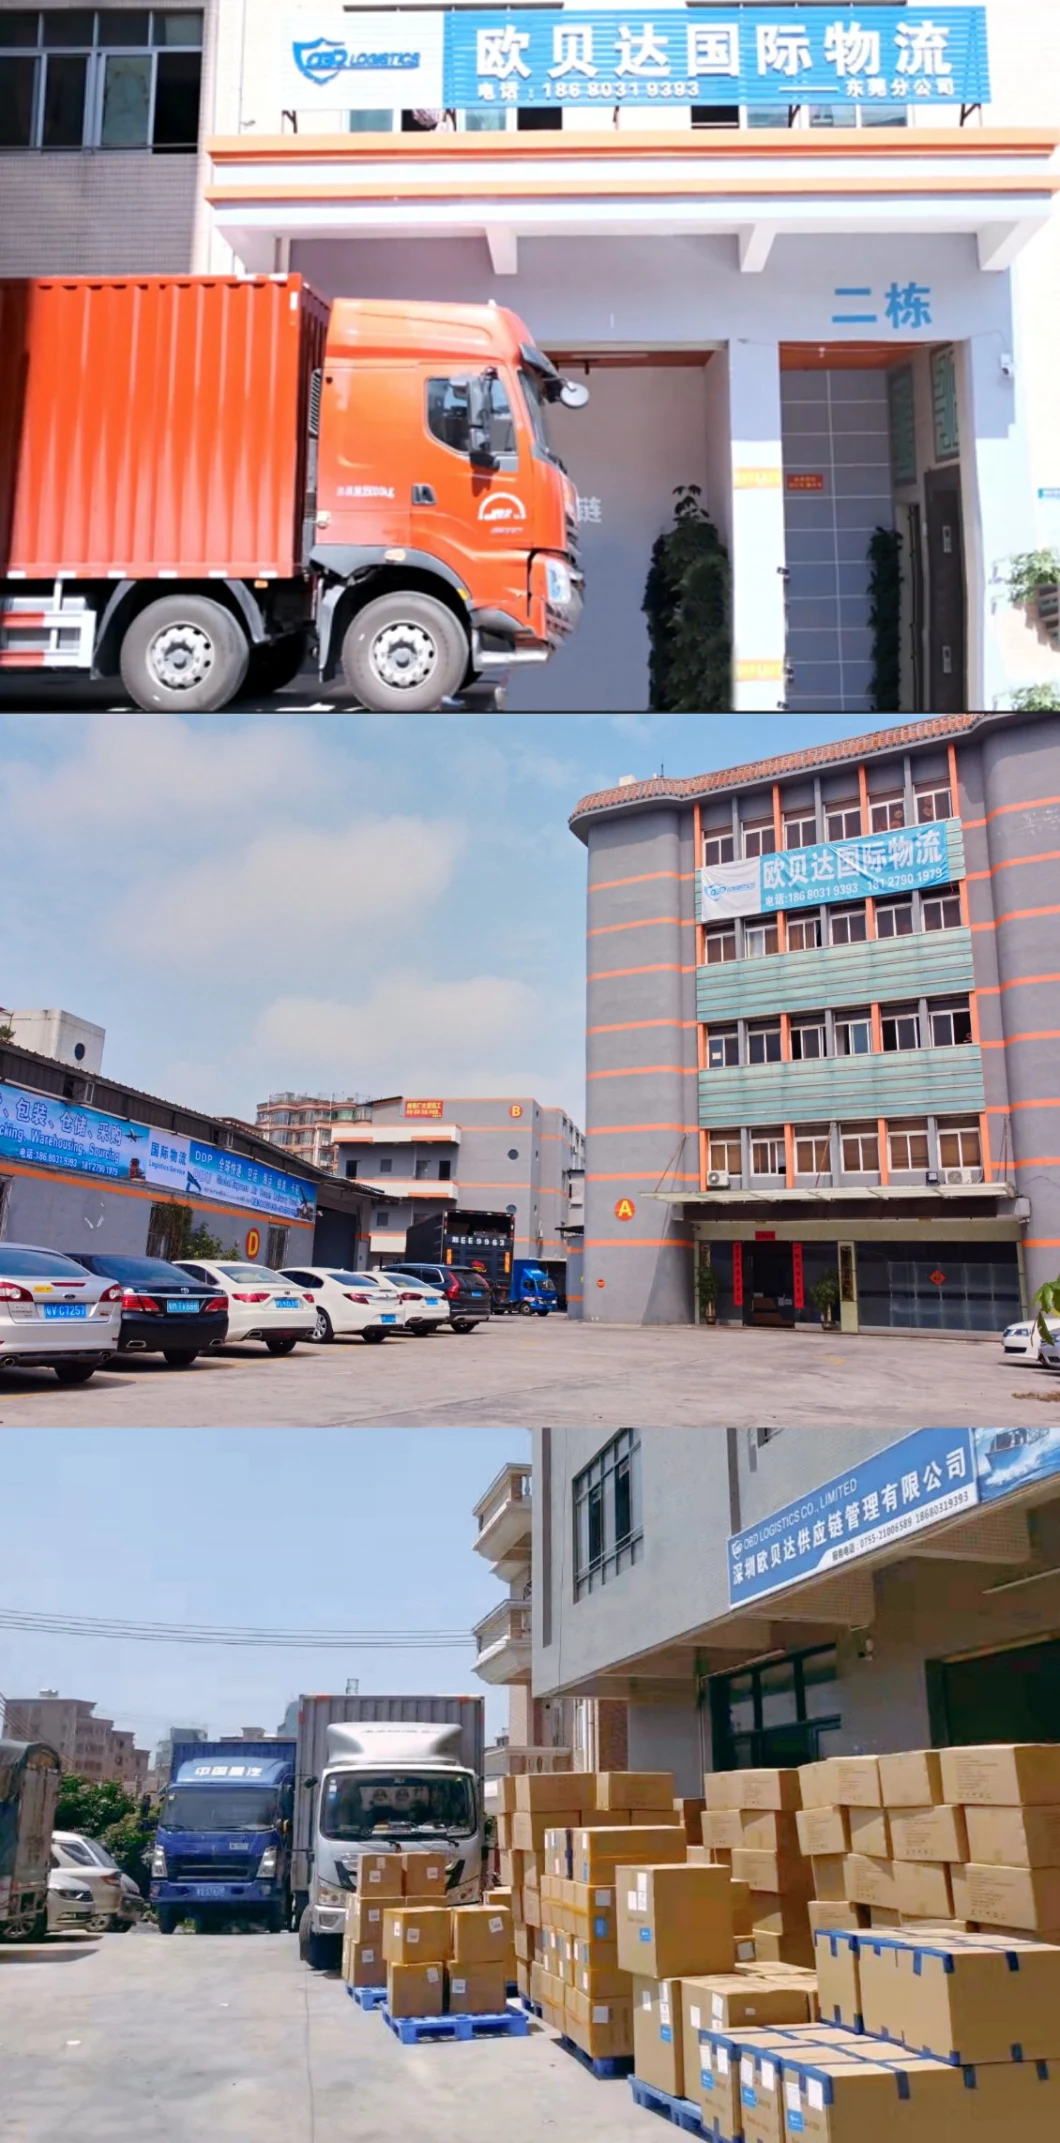 Alibaba/1688 Express, Air/Railway/Truck Cargo/Freight/Shipping Container LCL Forwarder/Agent From China to Moscow, Russia Door to Door DDP Logistics Trucking